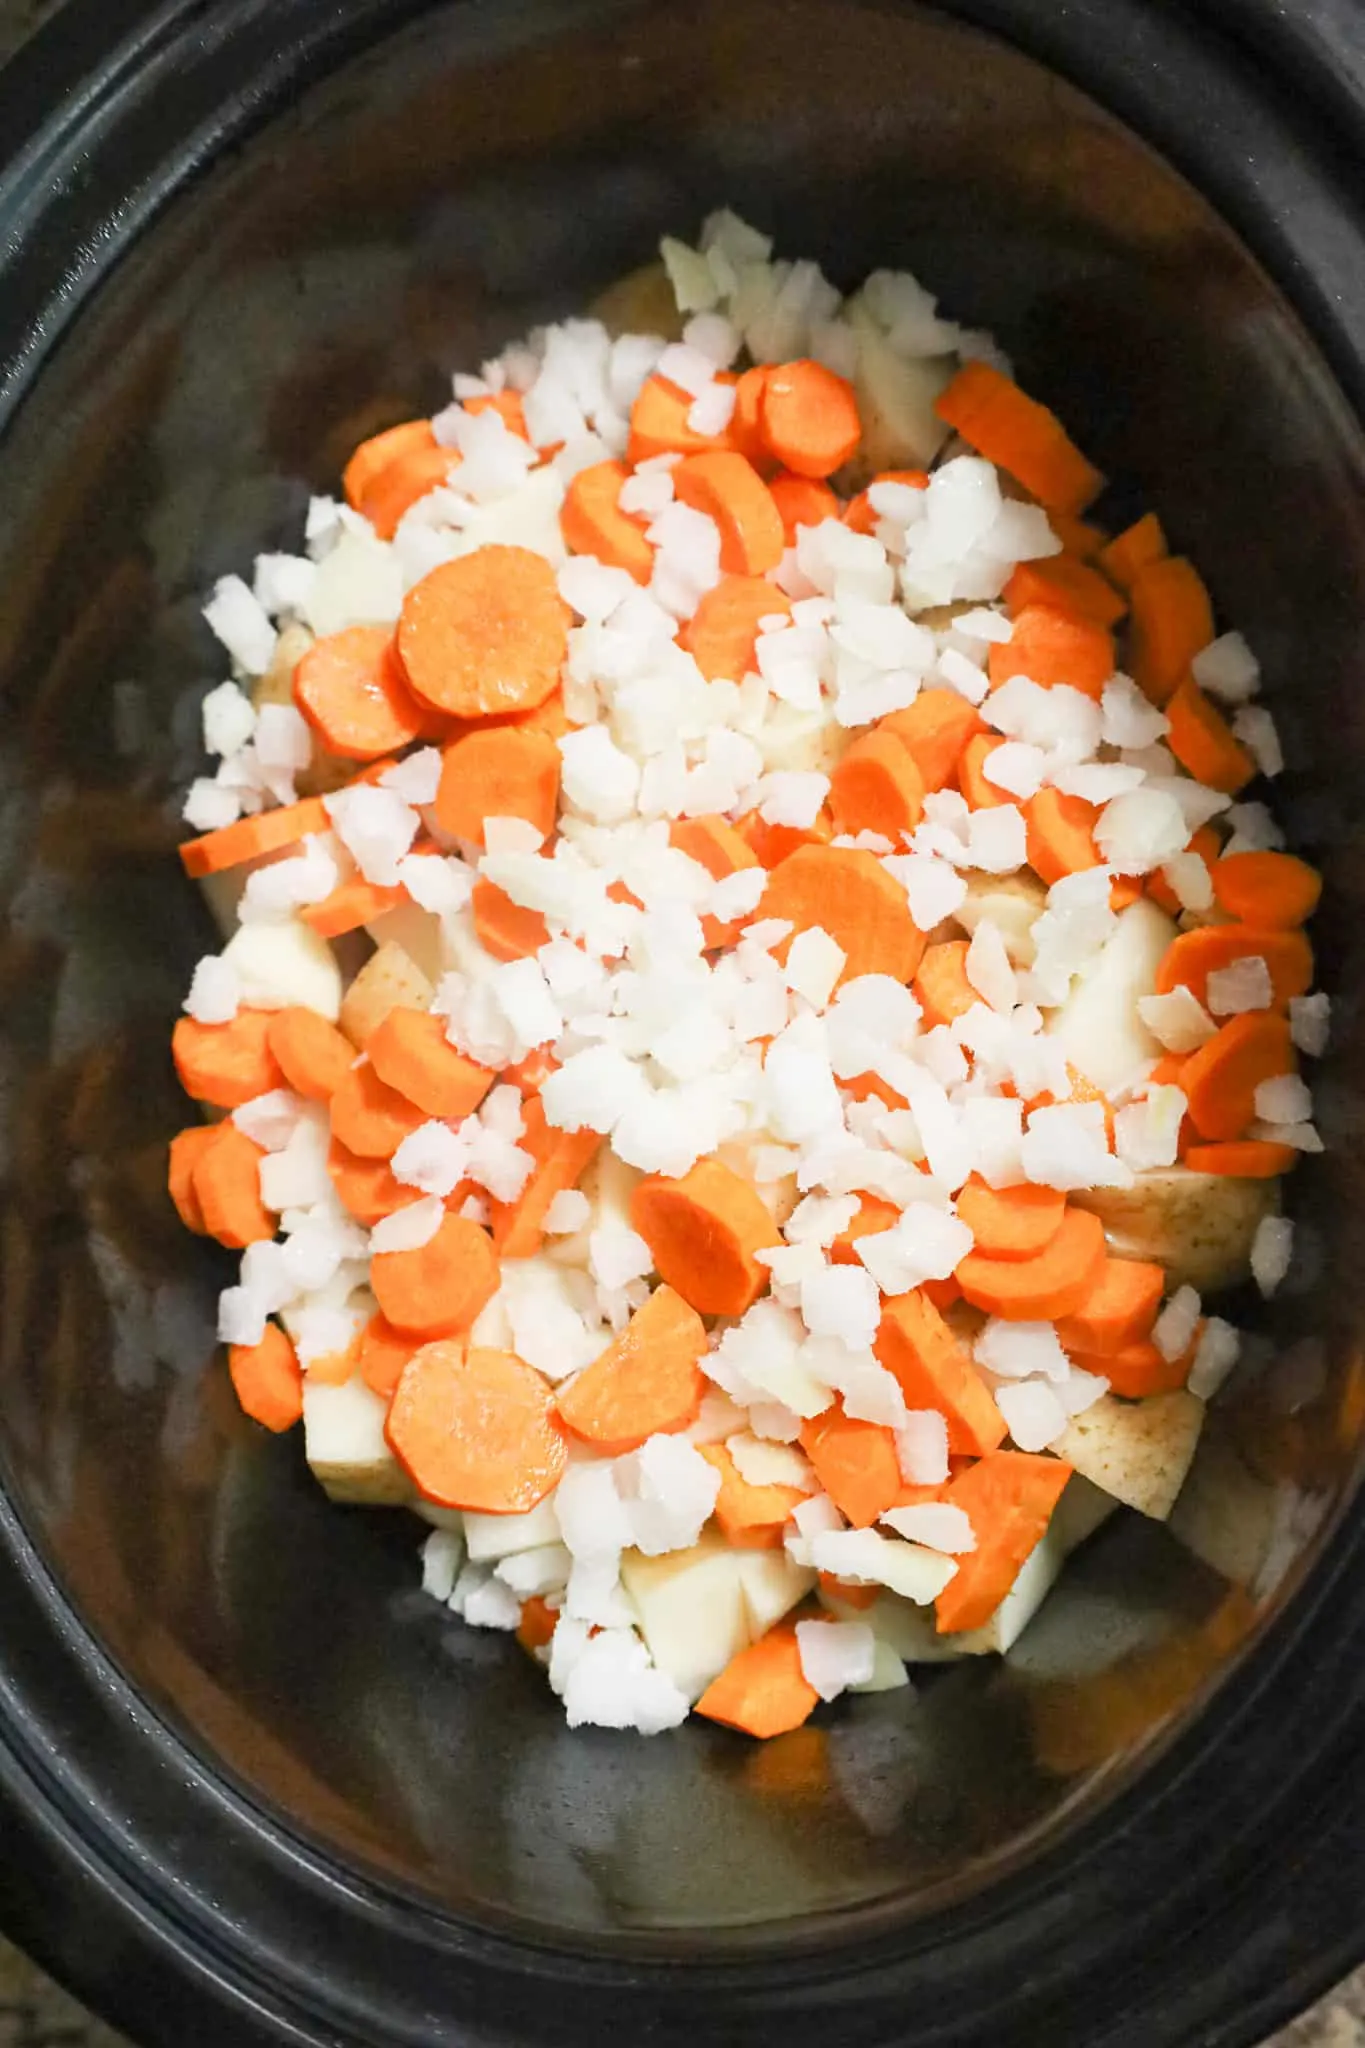 diced onions, sliced carrots and potato chunks in a crock pot